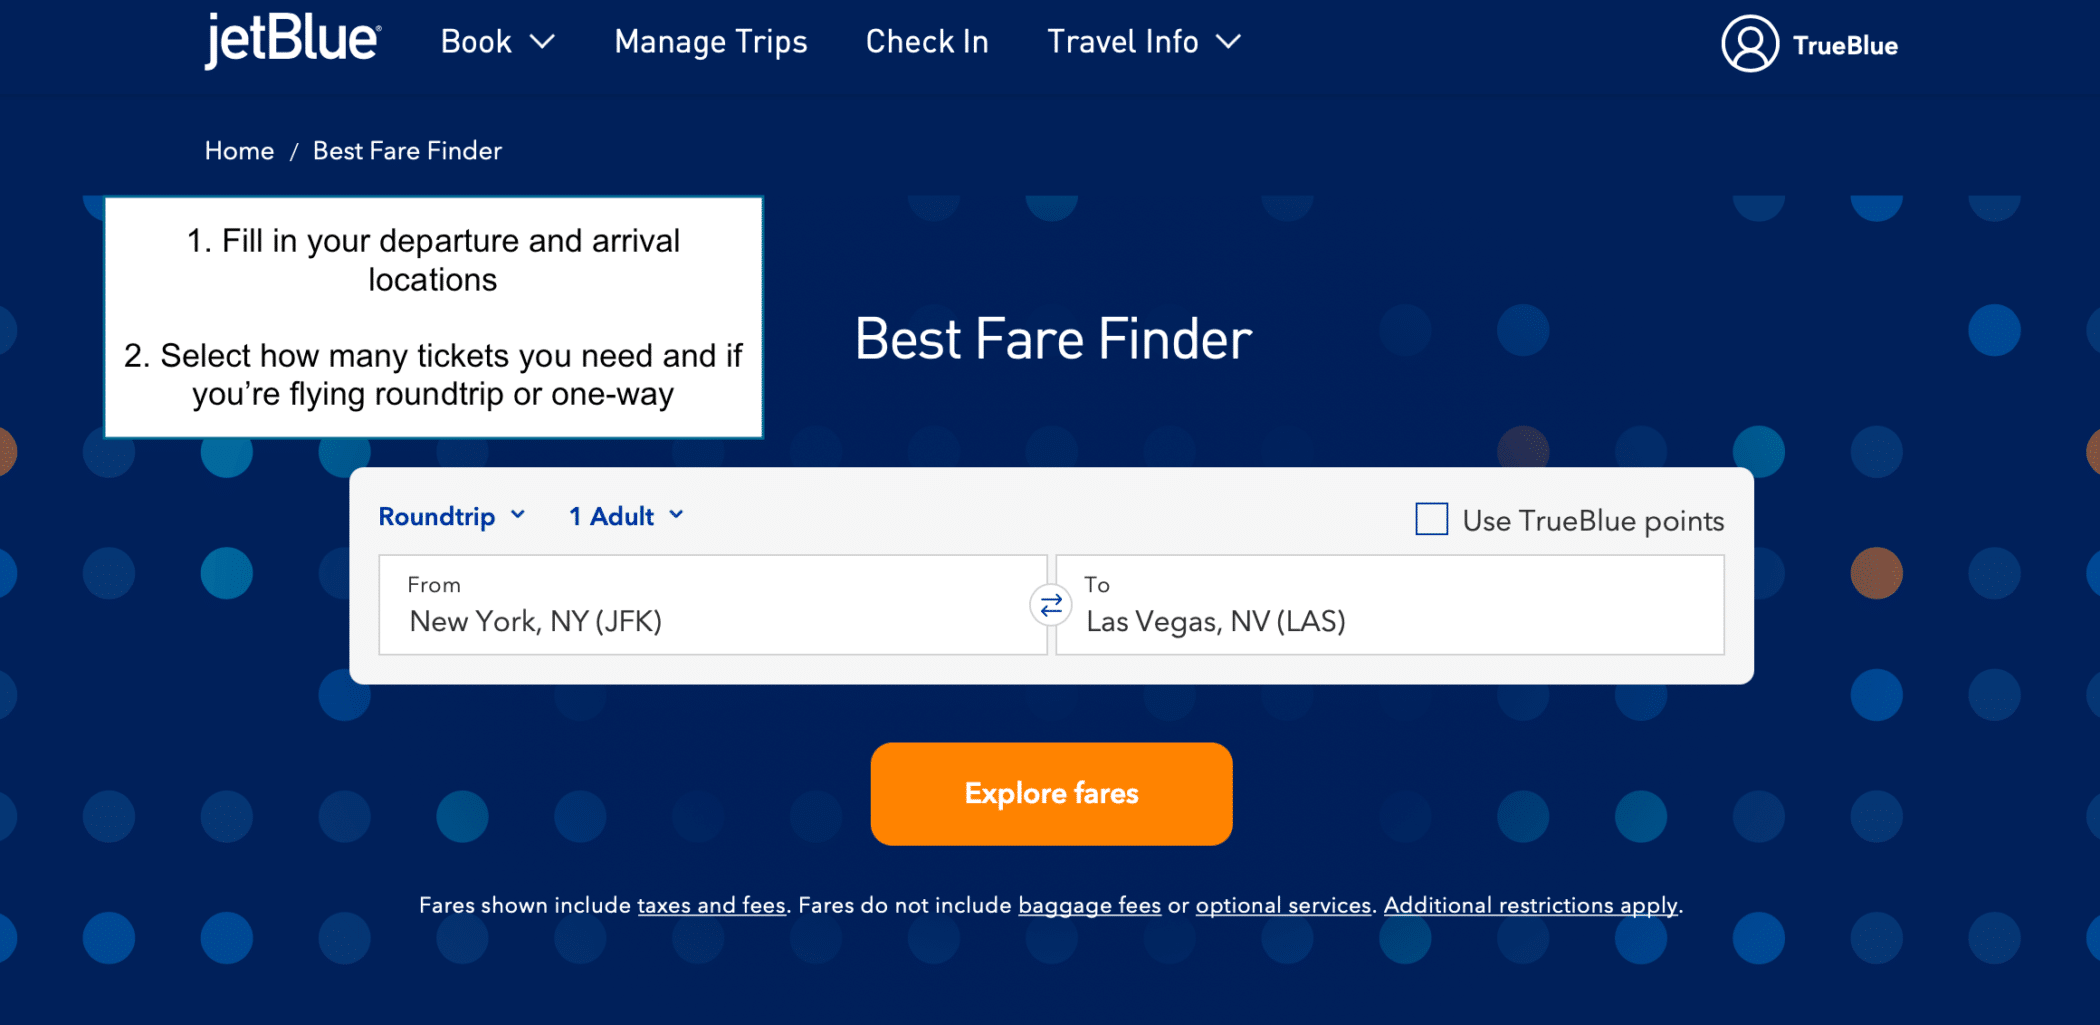 Best Fare Finder departure and arrival locations